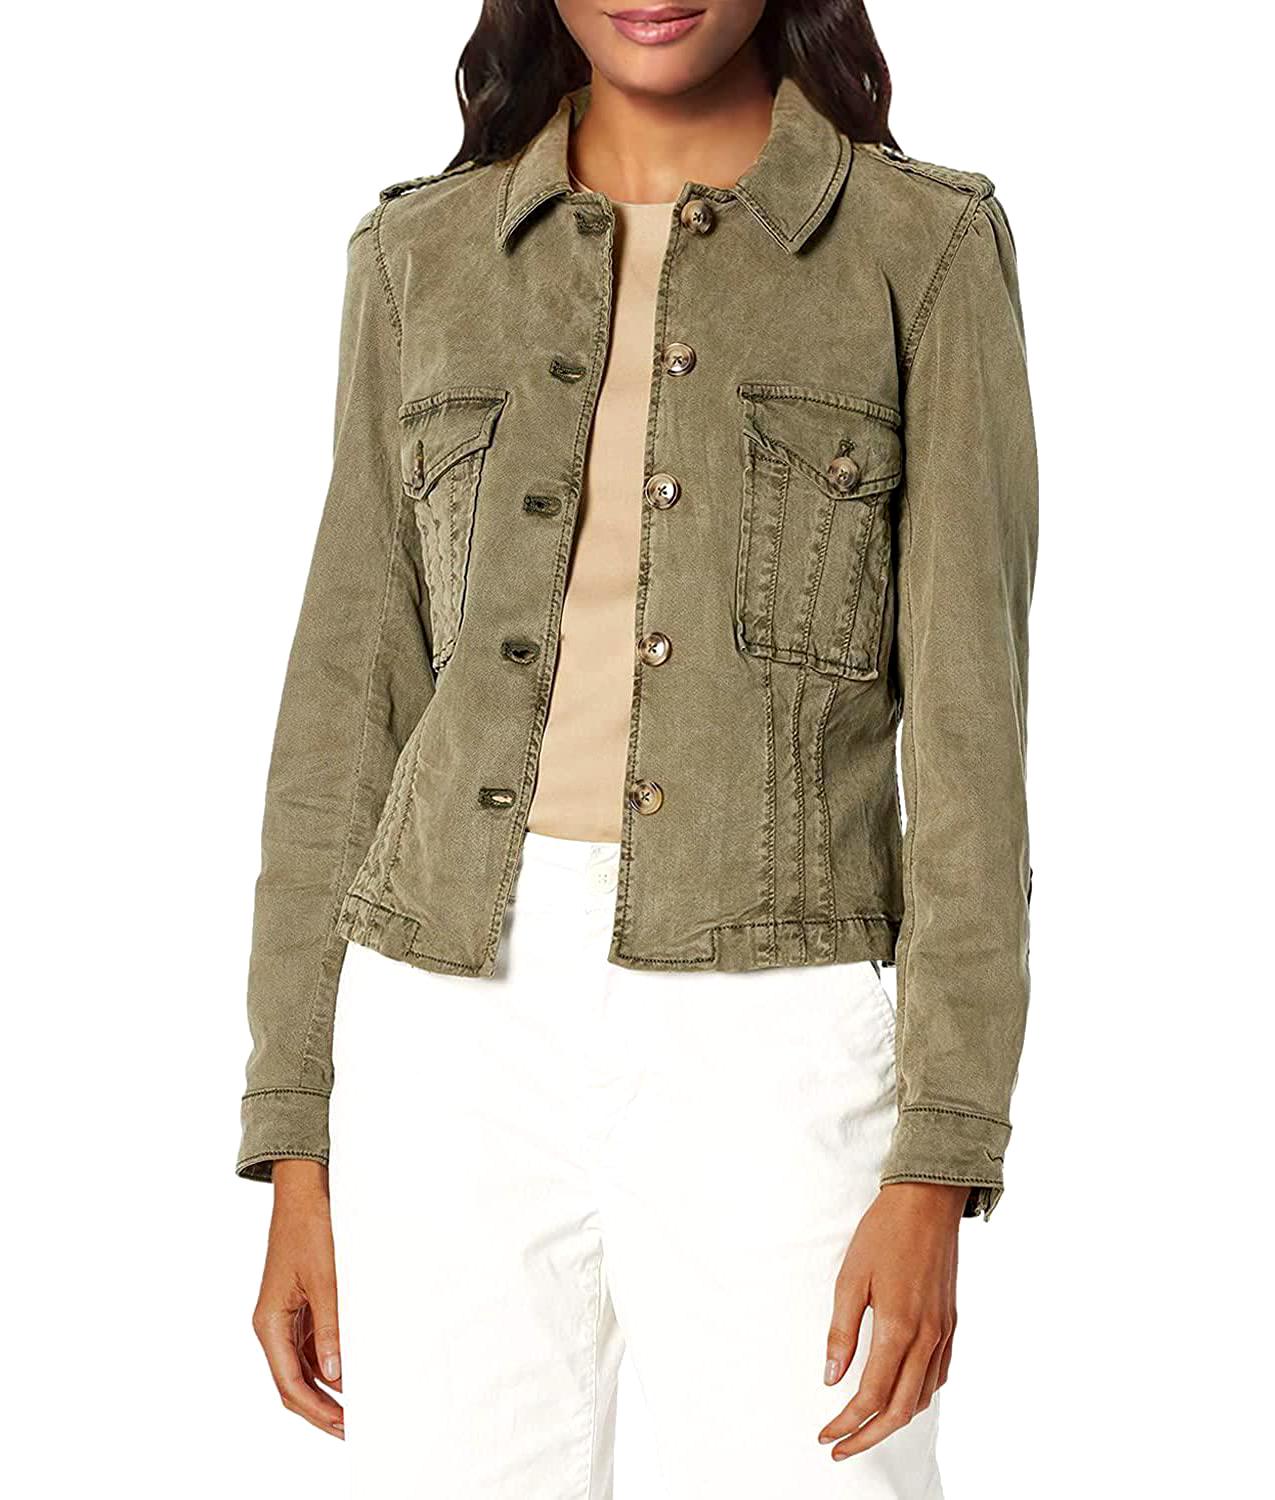 PAIGE Women's Pacey Jacket in Vintage Ivy Green